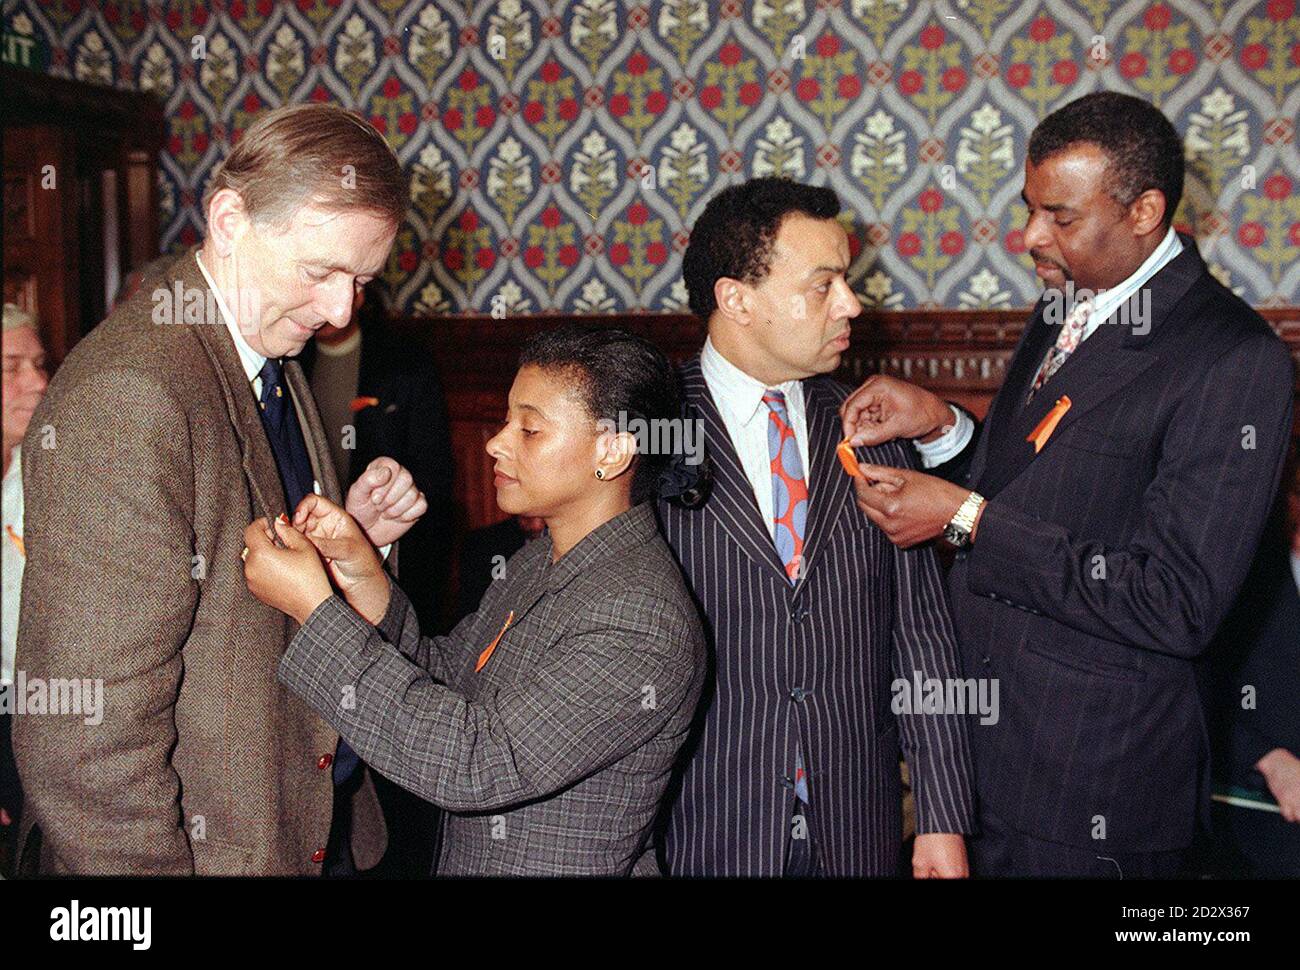 Neville and Doreen Lawrence, parents of murdered teenager Stephen Lawrence, pin a 'Torrid orange' ribbon on MPs Peter Bottomley (left) and Paul Boateng in the Jubilee Rooms of the House of Commons today (Monday), where they launched the Ribbon in memory of their son. April 22nd is the third anniversary of Stephen's murder. During the previous week, on April 16, three youths will face charges of murder at the Old Bailey, when Neville and Doreen's unprecedented private prosecution commences. Stock Photo